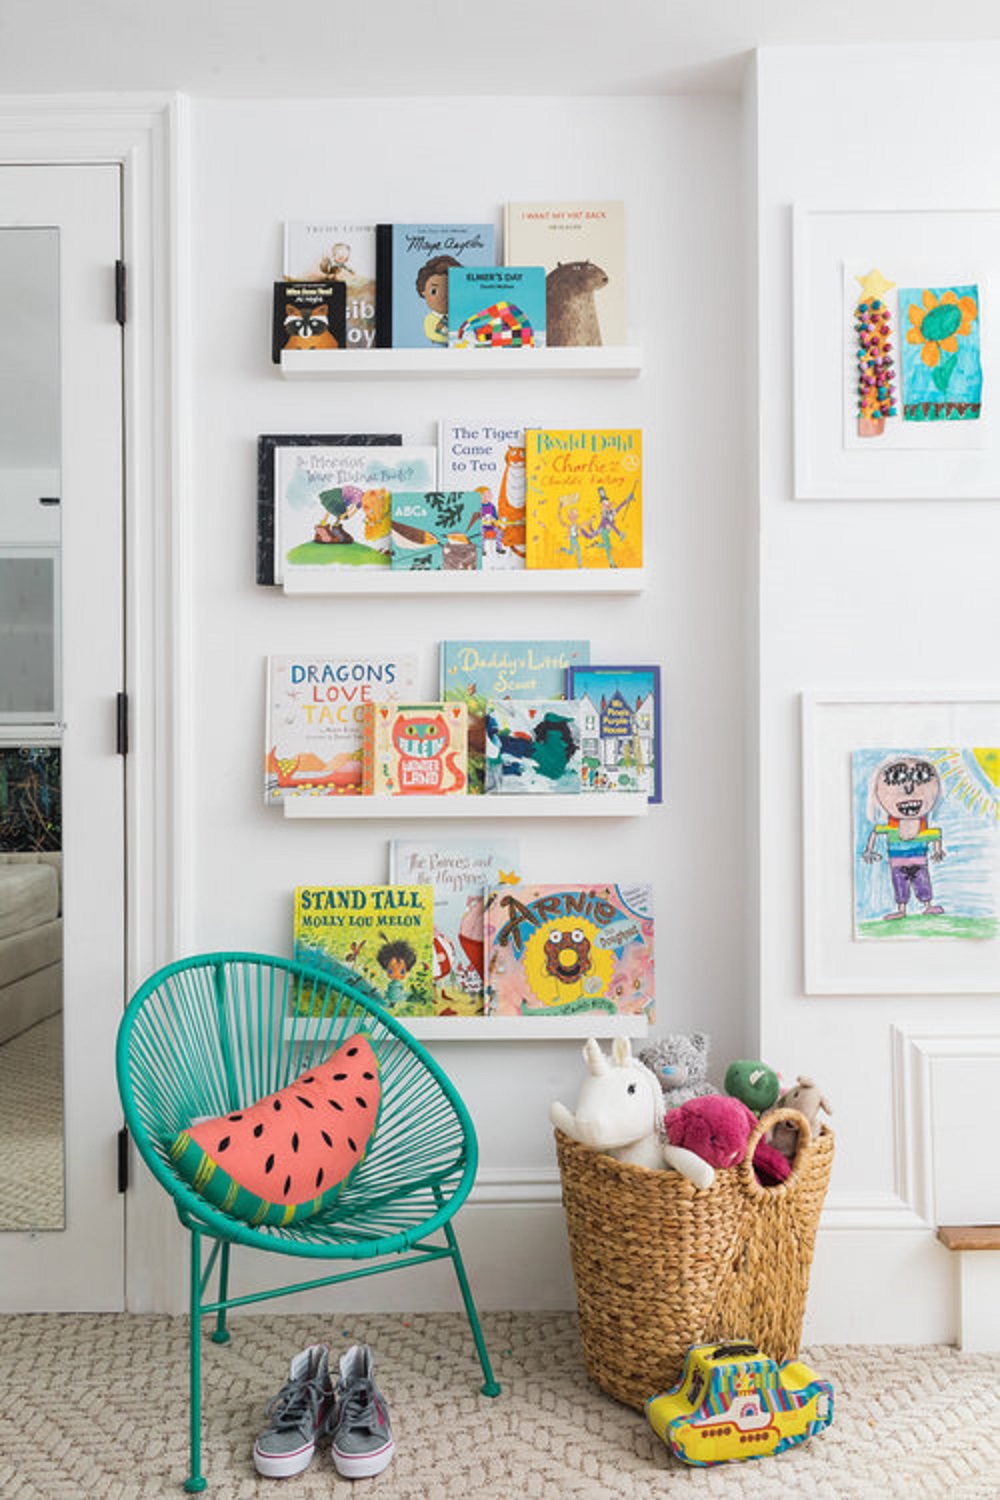 Joyelle_180314_008 Kids playroom ideas: How to arrange and decorate the coolest kids space